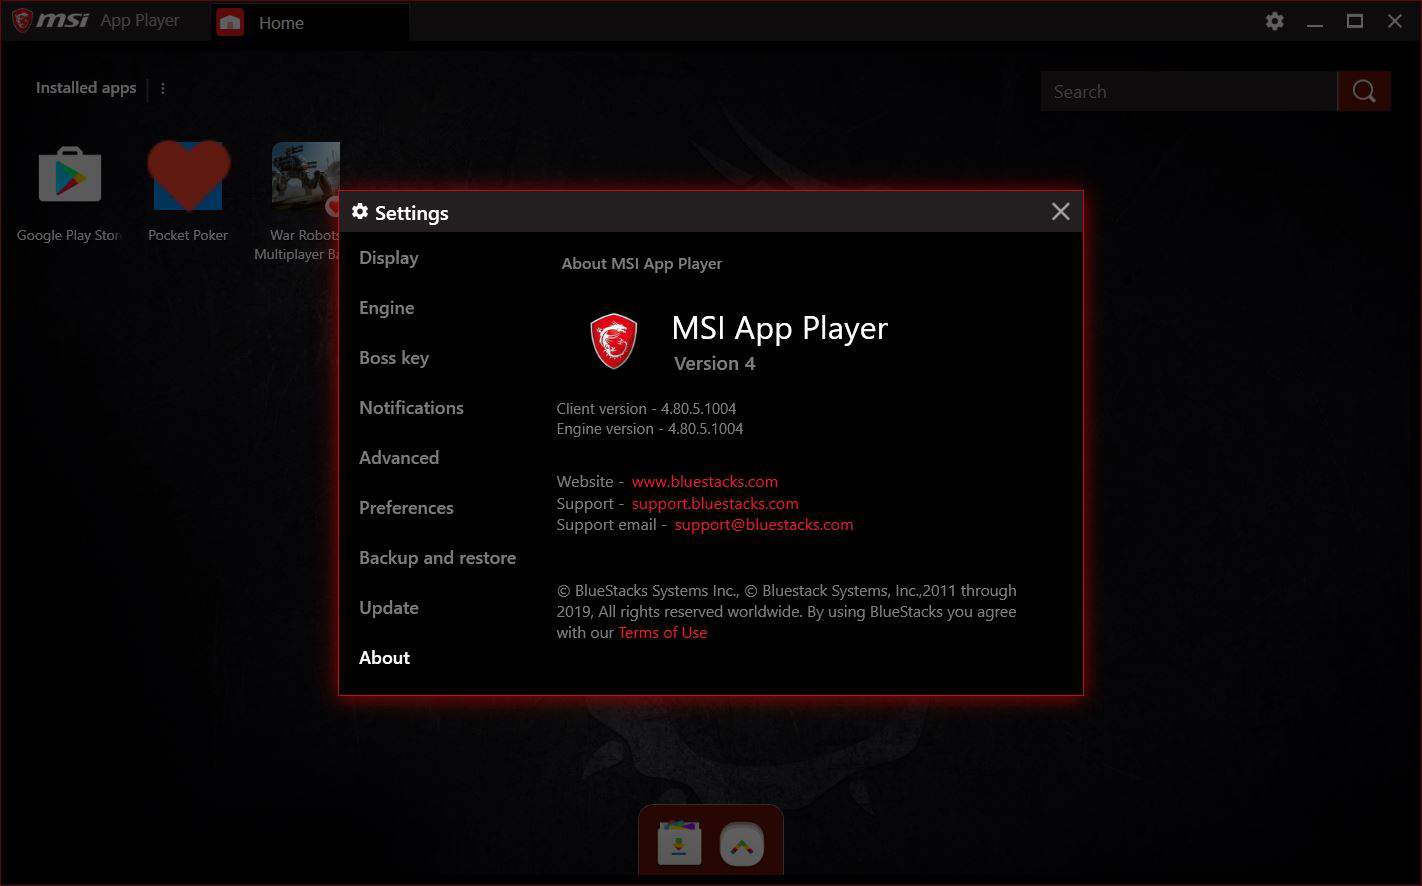 MSI App Player About Settings